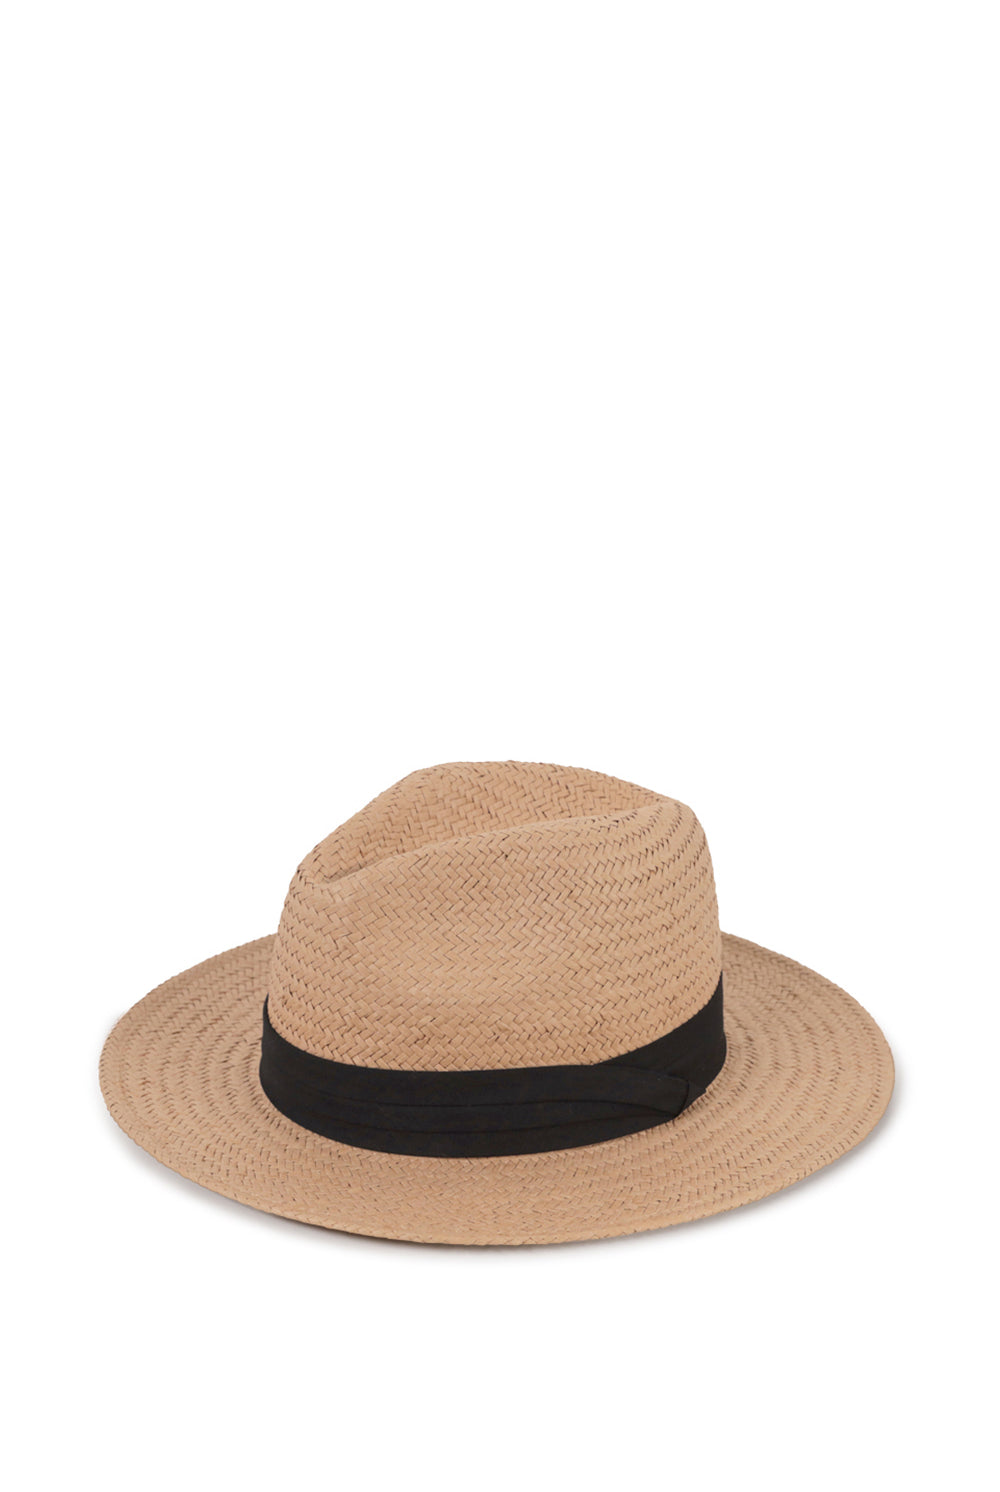 My Accessories London Straw fedora with Grosgrain Trim in Beige and Black | Panama Hat | Beach | Holiday | Summer | Occasion | Races | Women's | Women's Accessories | Accessory | Hat | Hats | BBQ